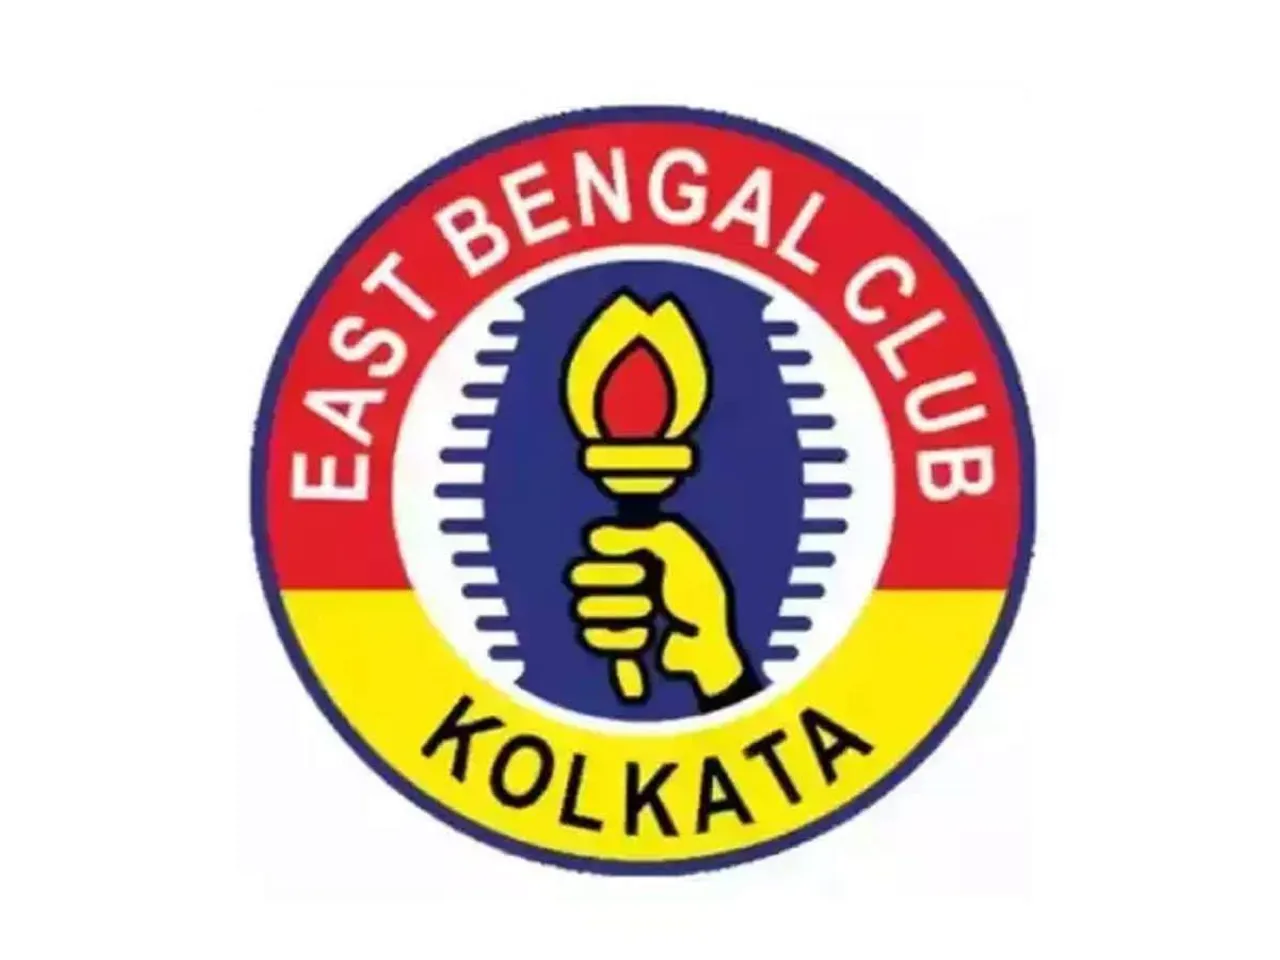 Tangled with Quarantine in Eastbengal Club